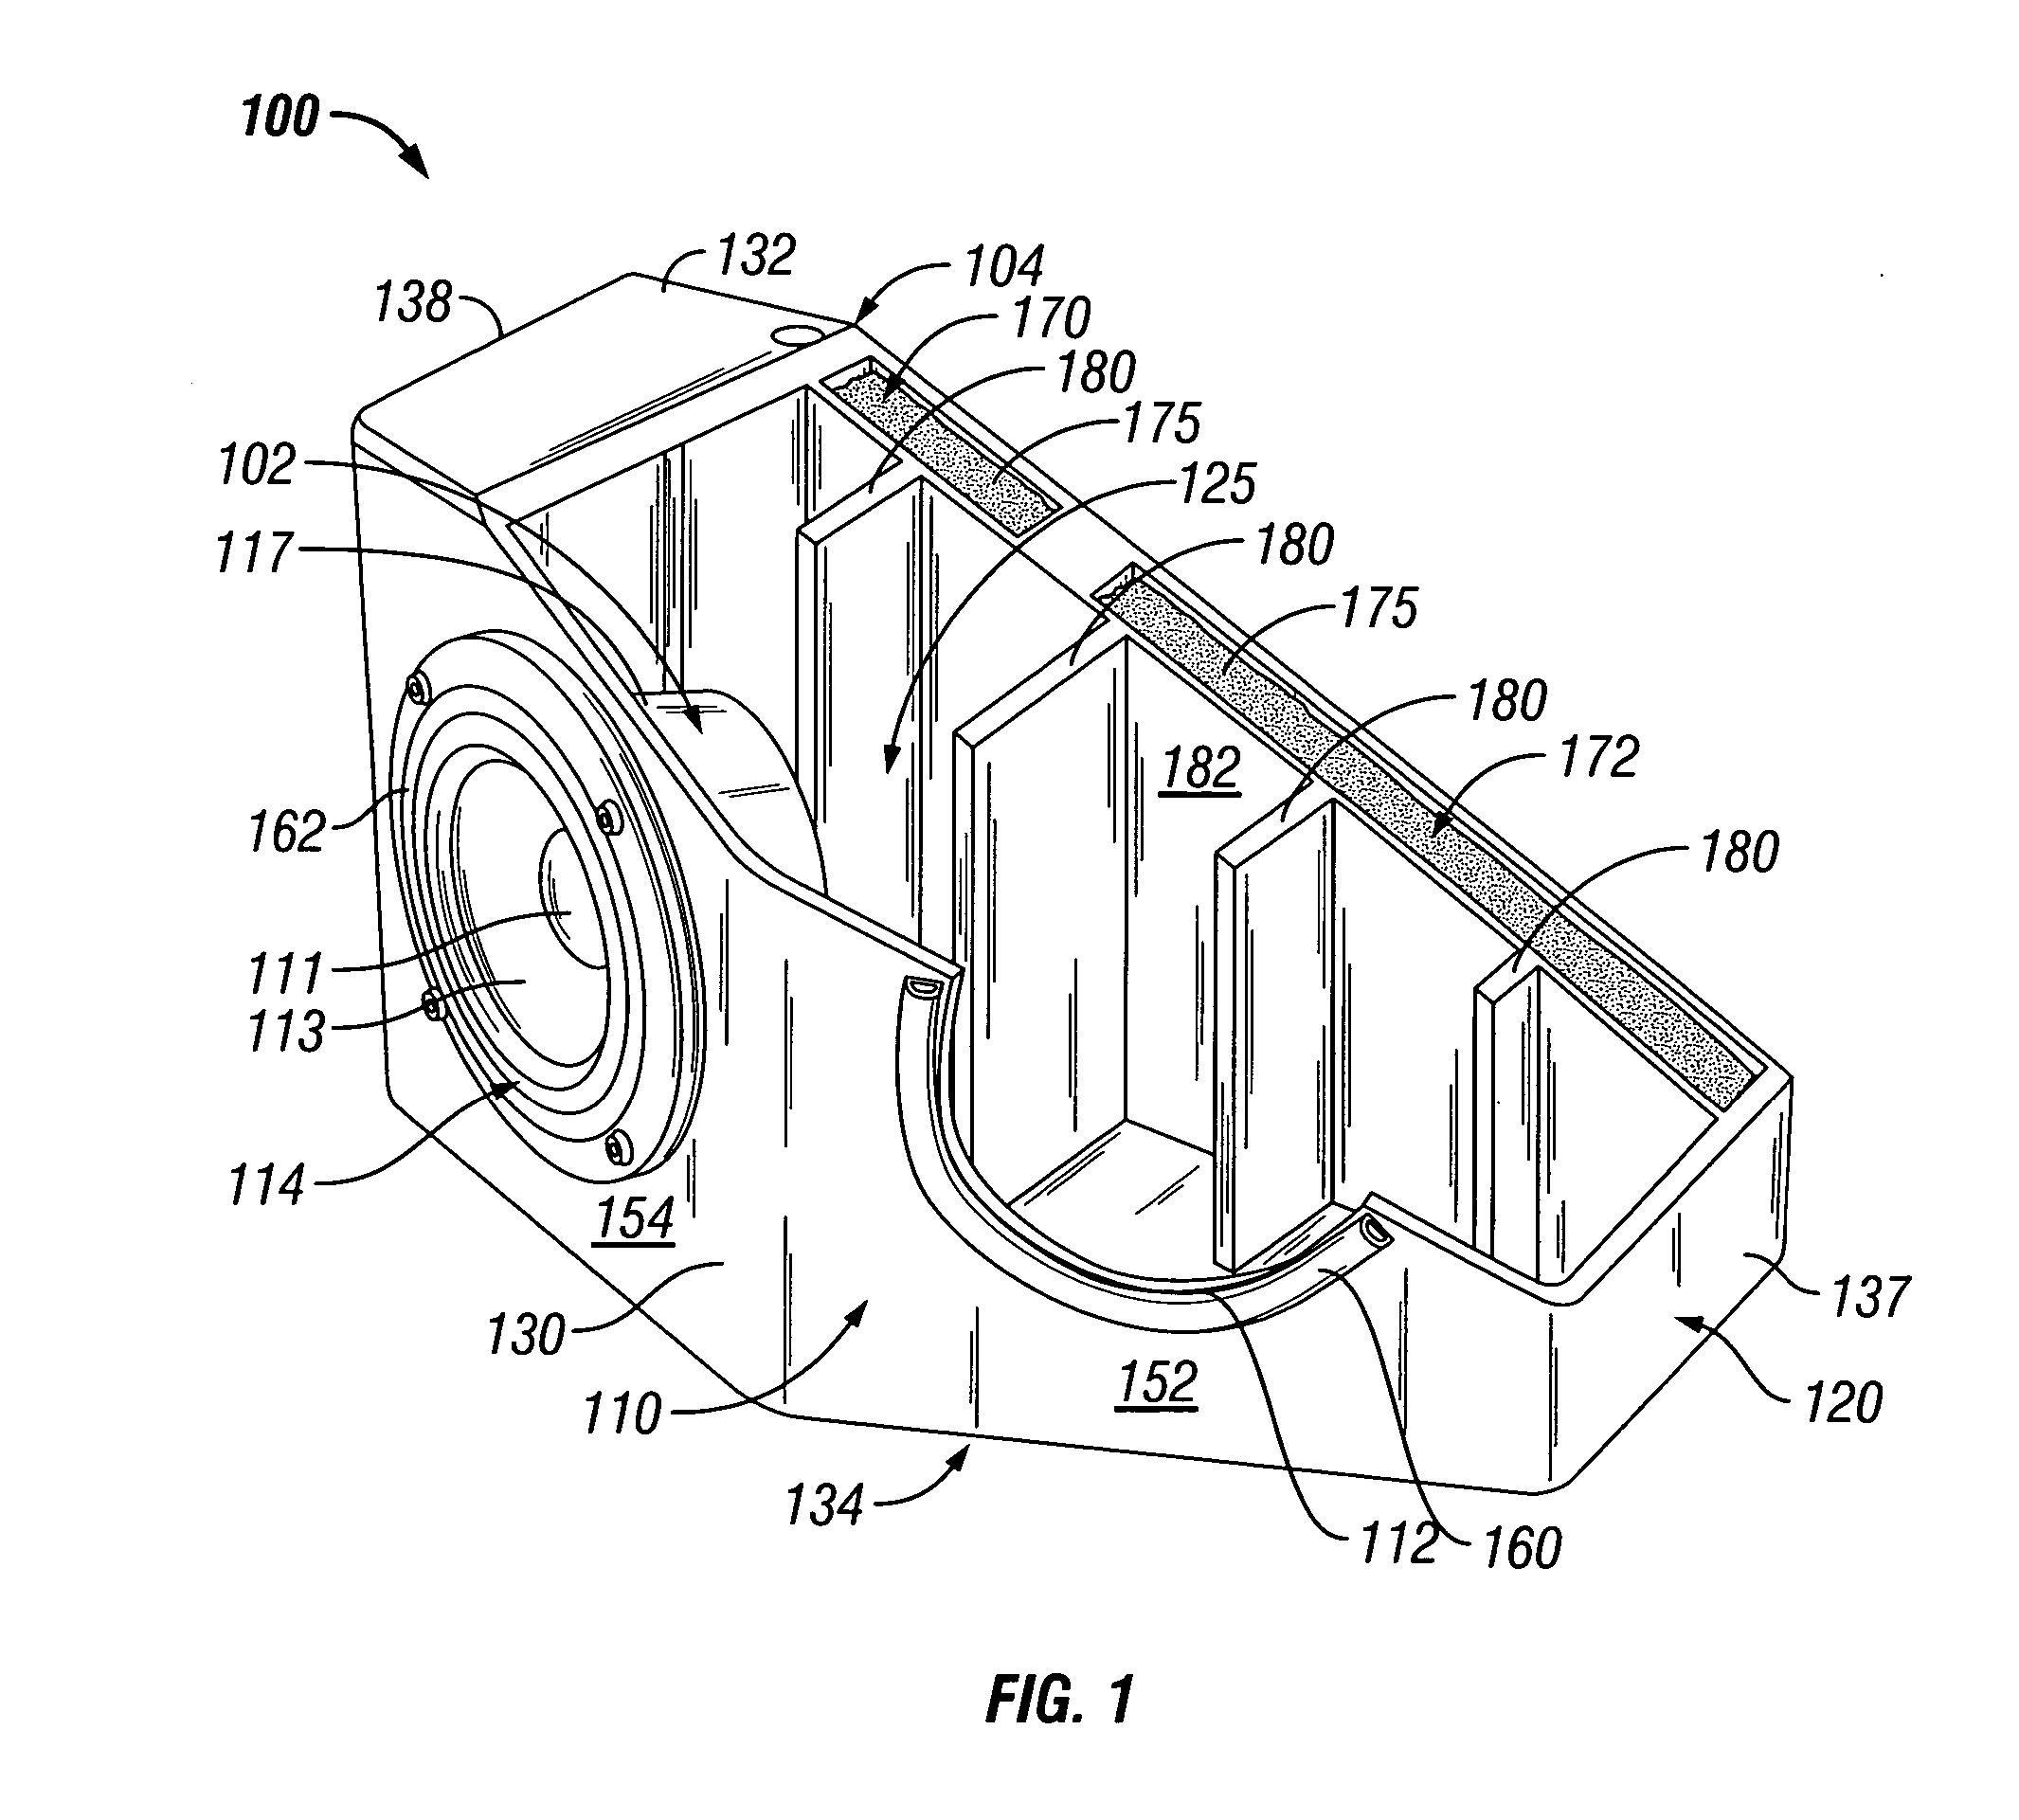 Speaker enclosure with a liquid chamber for mounting a speaker driver